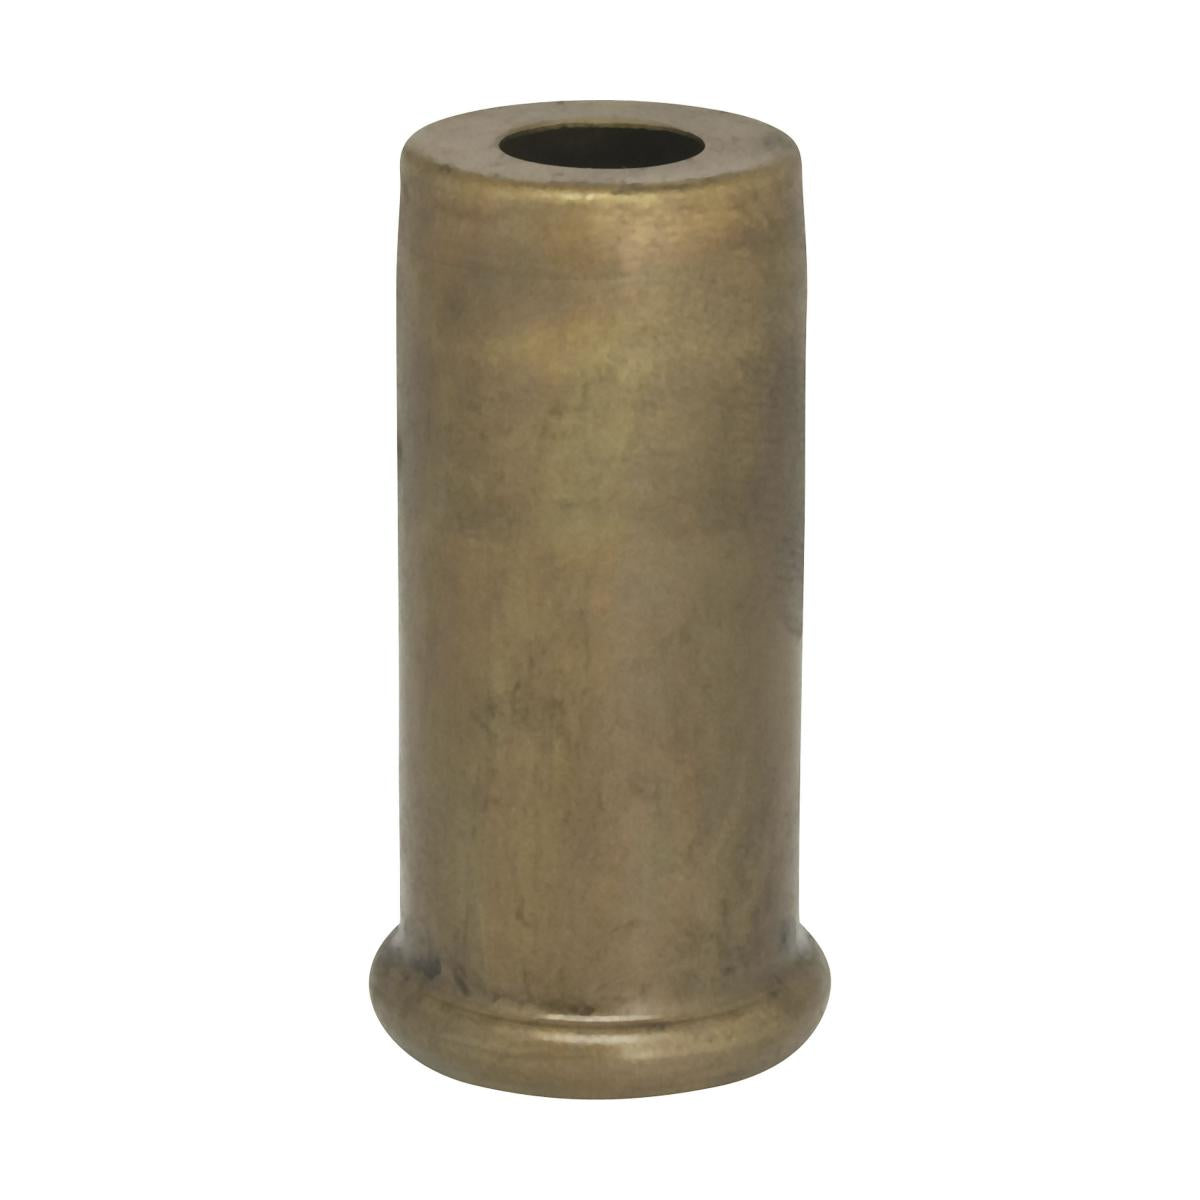 Satco 90-2220 Solid Brass Spacer 7/16" Hole 2" Height 7/8" Diameter 1" Base Diameter Unfinished